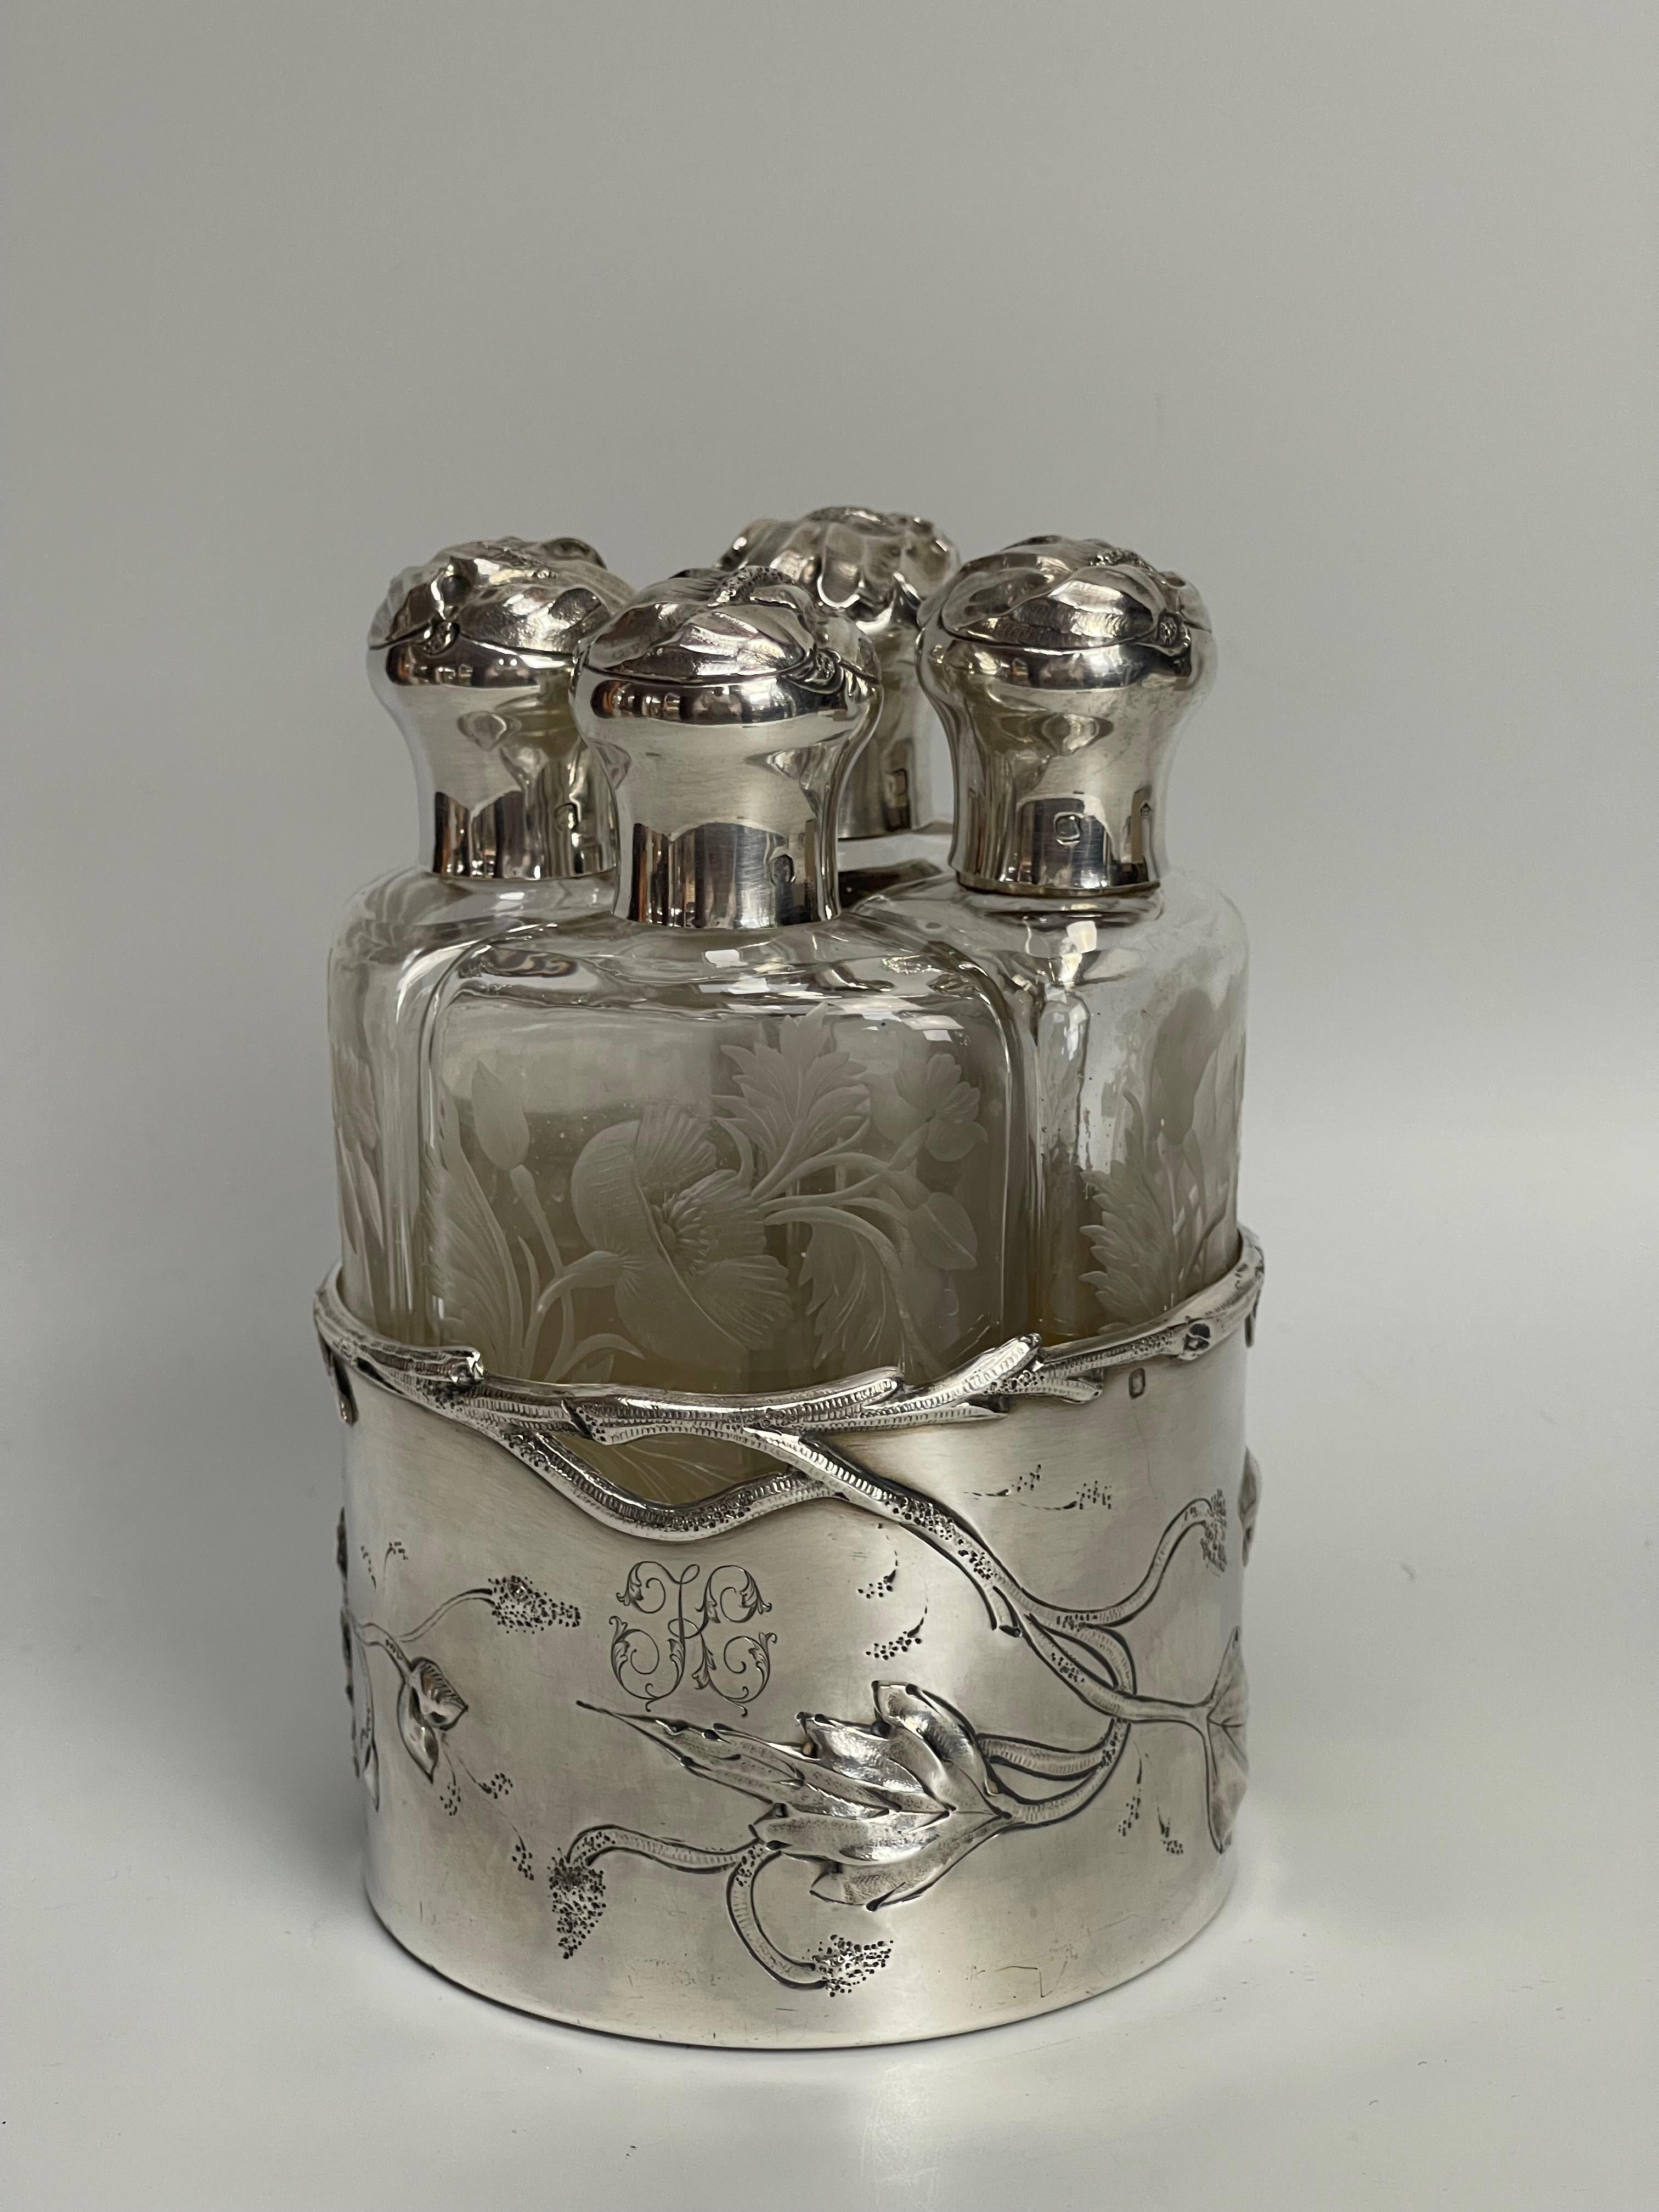 Perfume kit consisting of 4 bottles with wheel-engraved floral decoration. Frame and basket in solid silver with floral decoration and 